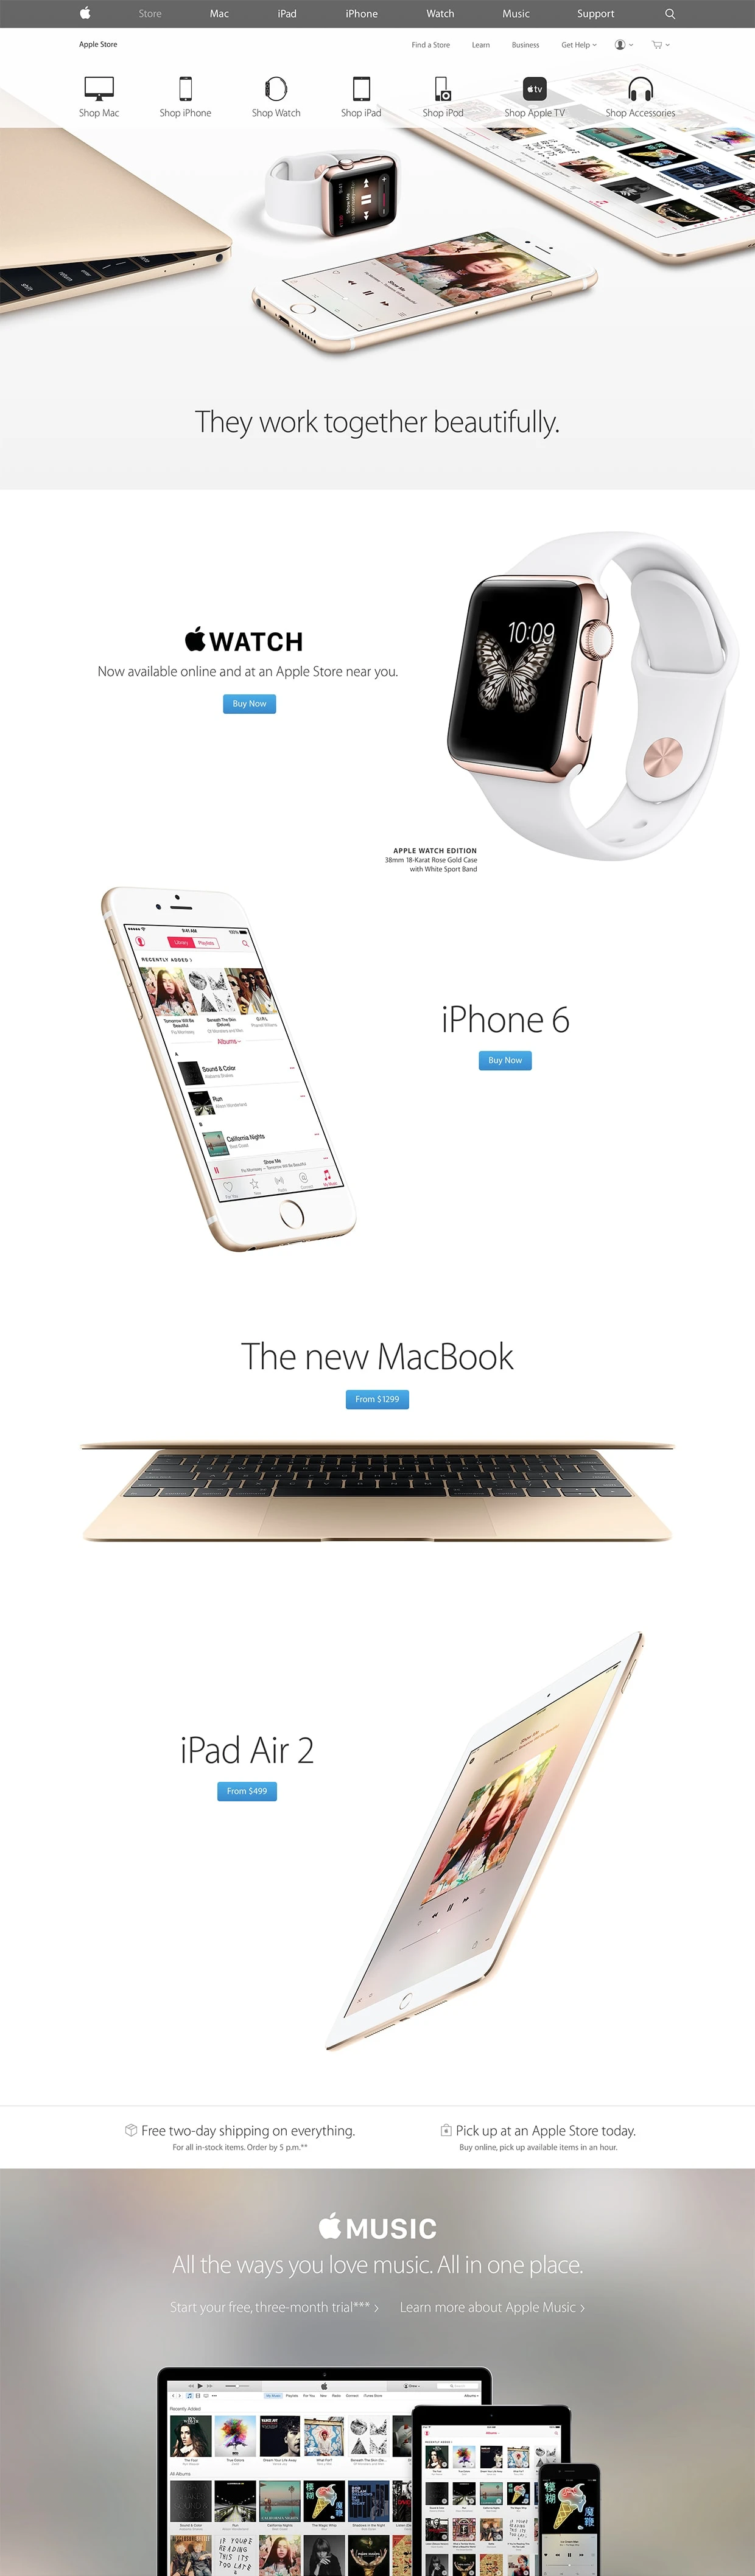 Apple Landing Page Example: Apple leads the world in innovation with iPhone, iPad, Mac, Apple Watch, iOS, OS X, watchOS and more. Visit the site to learn, buy, and get support.